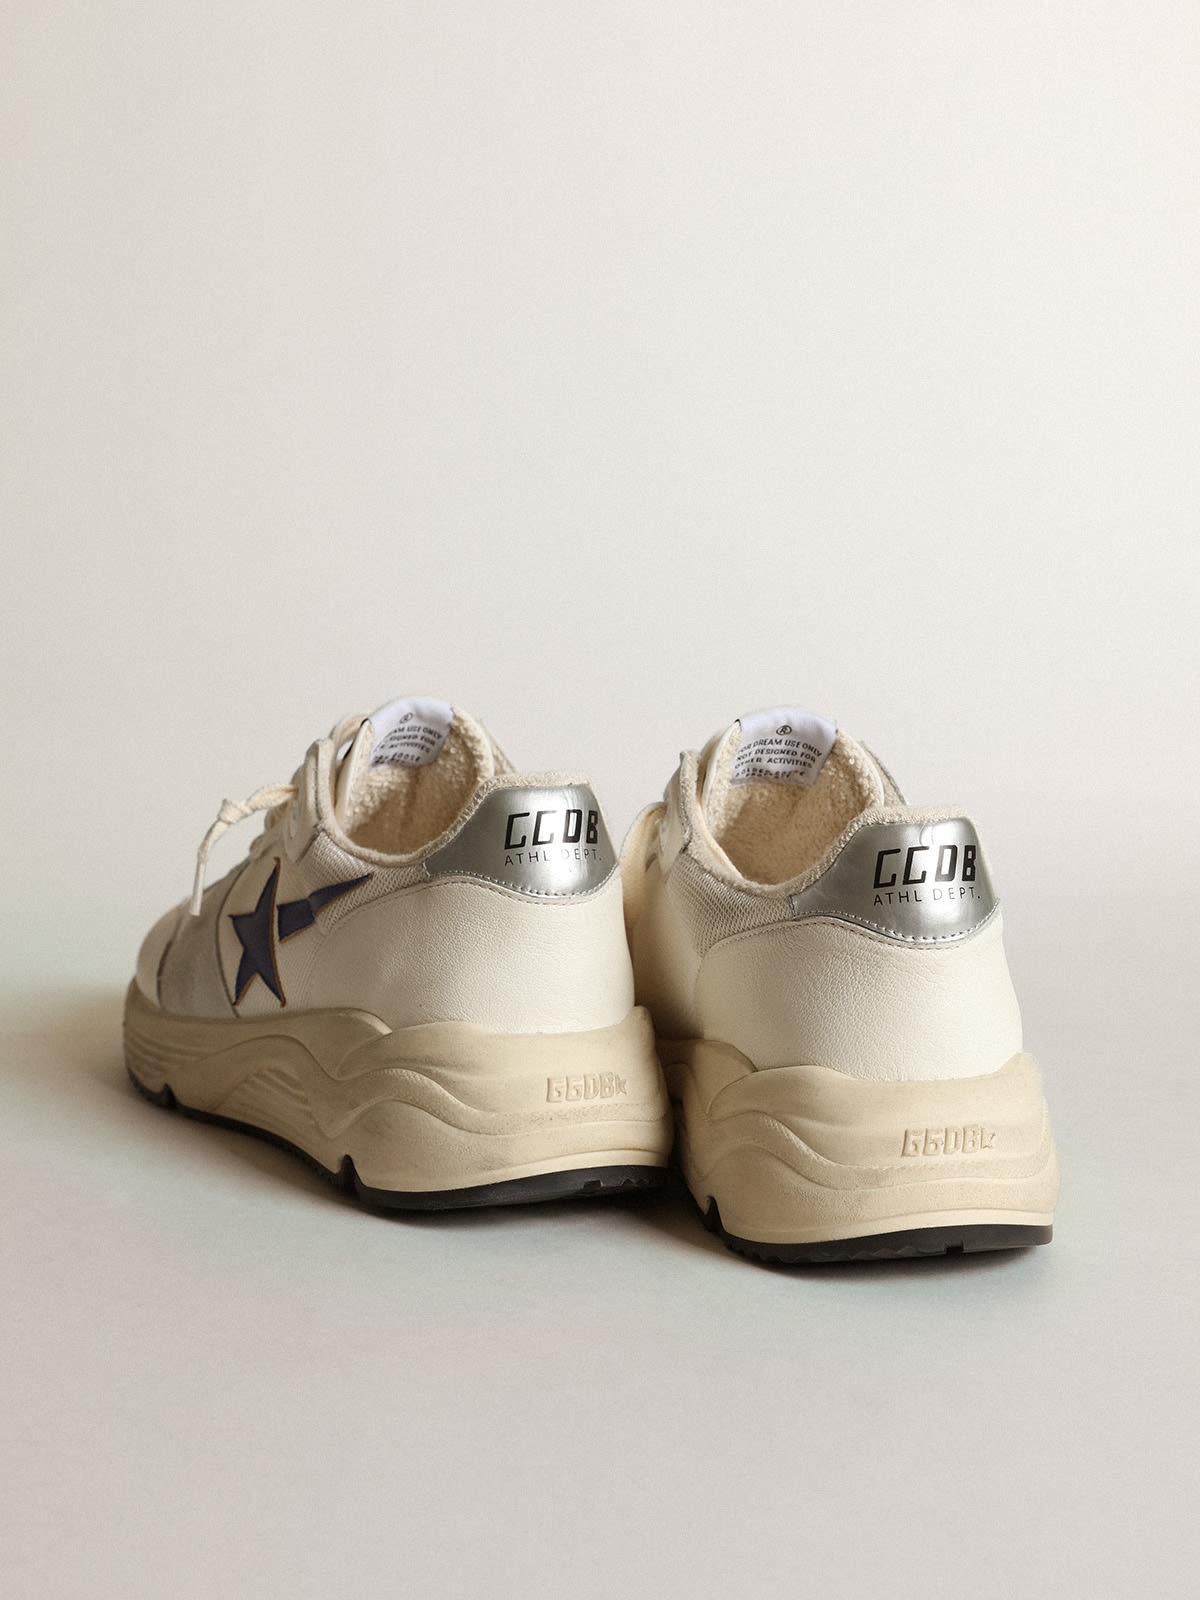 Running Sole in white mesh and nappa leather with a blue star - 5